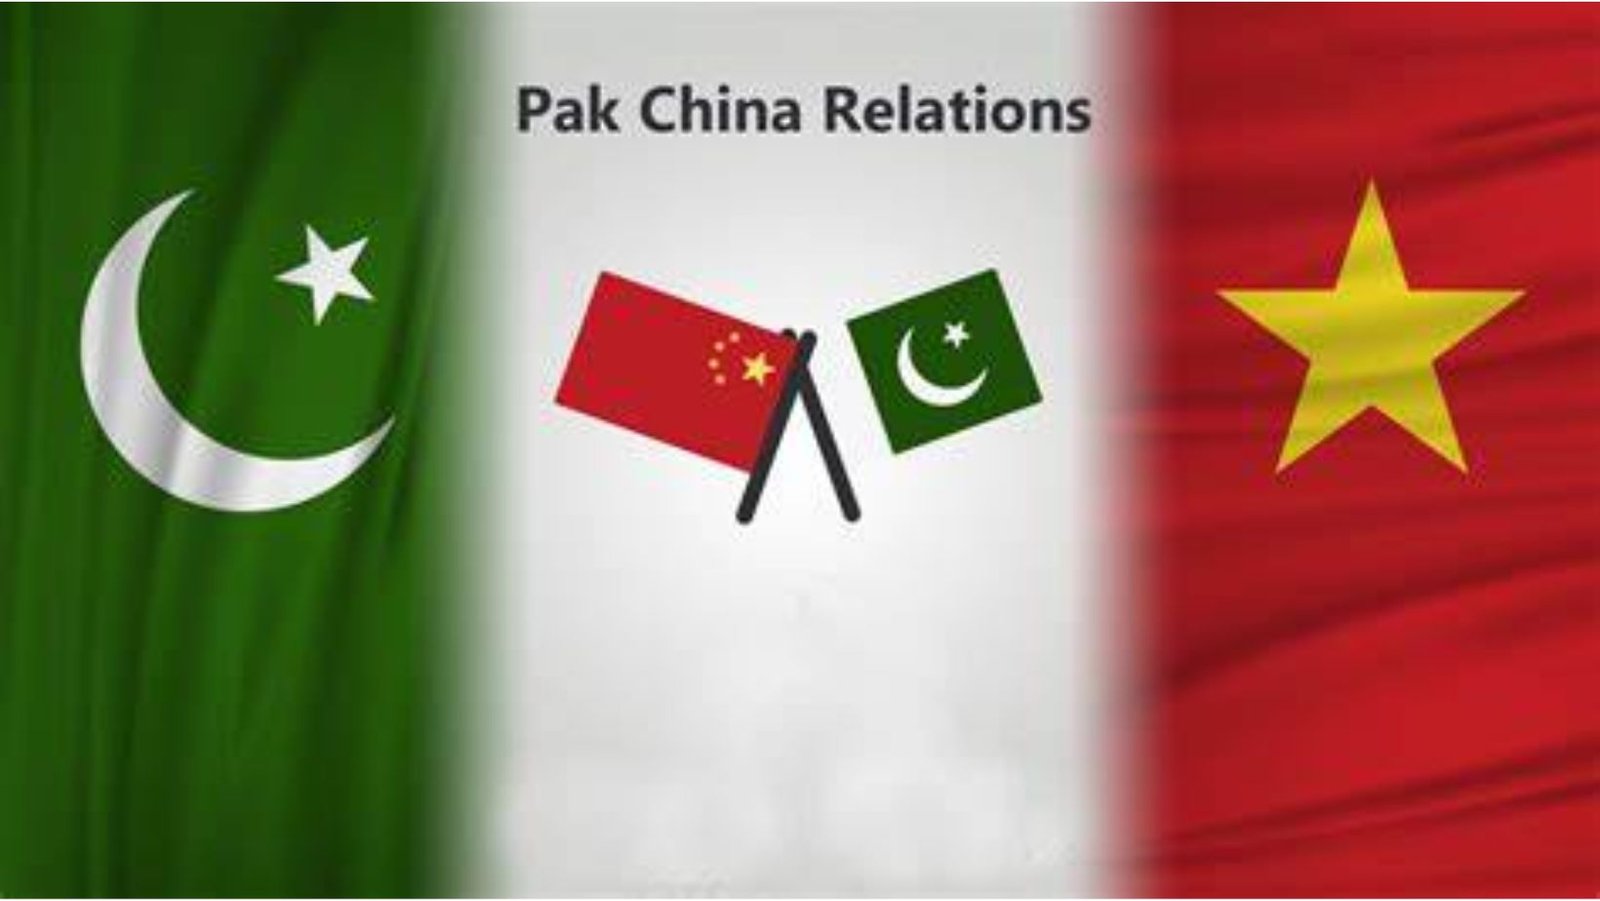 Cooperation between Pakistan and China is crucial to Pakistan's socioeconomic development